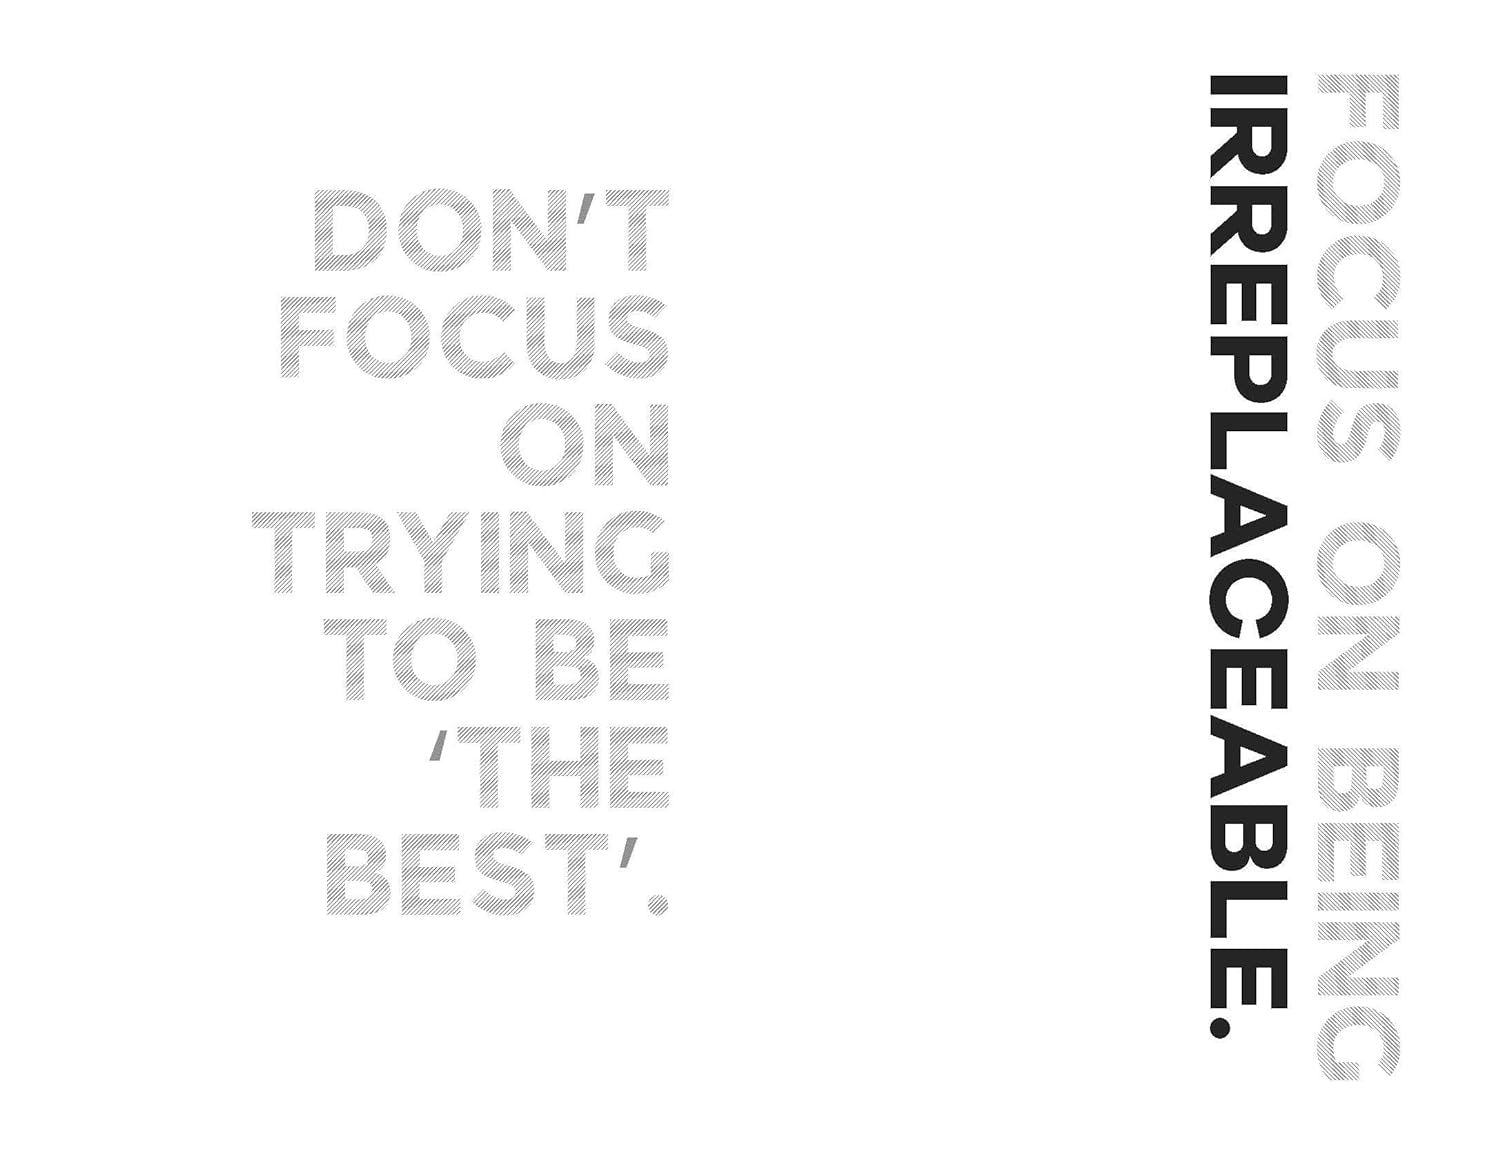 Monochrome image with motivational text that says, "don't focus on trying to be 'the best'. focus on being irreplaceable." inspired by Chidera Eggerue. The "What a Time to Journal: Work Out Why You Are Already Enough" by Chidera Eggerue.